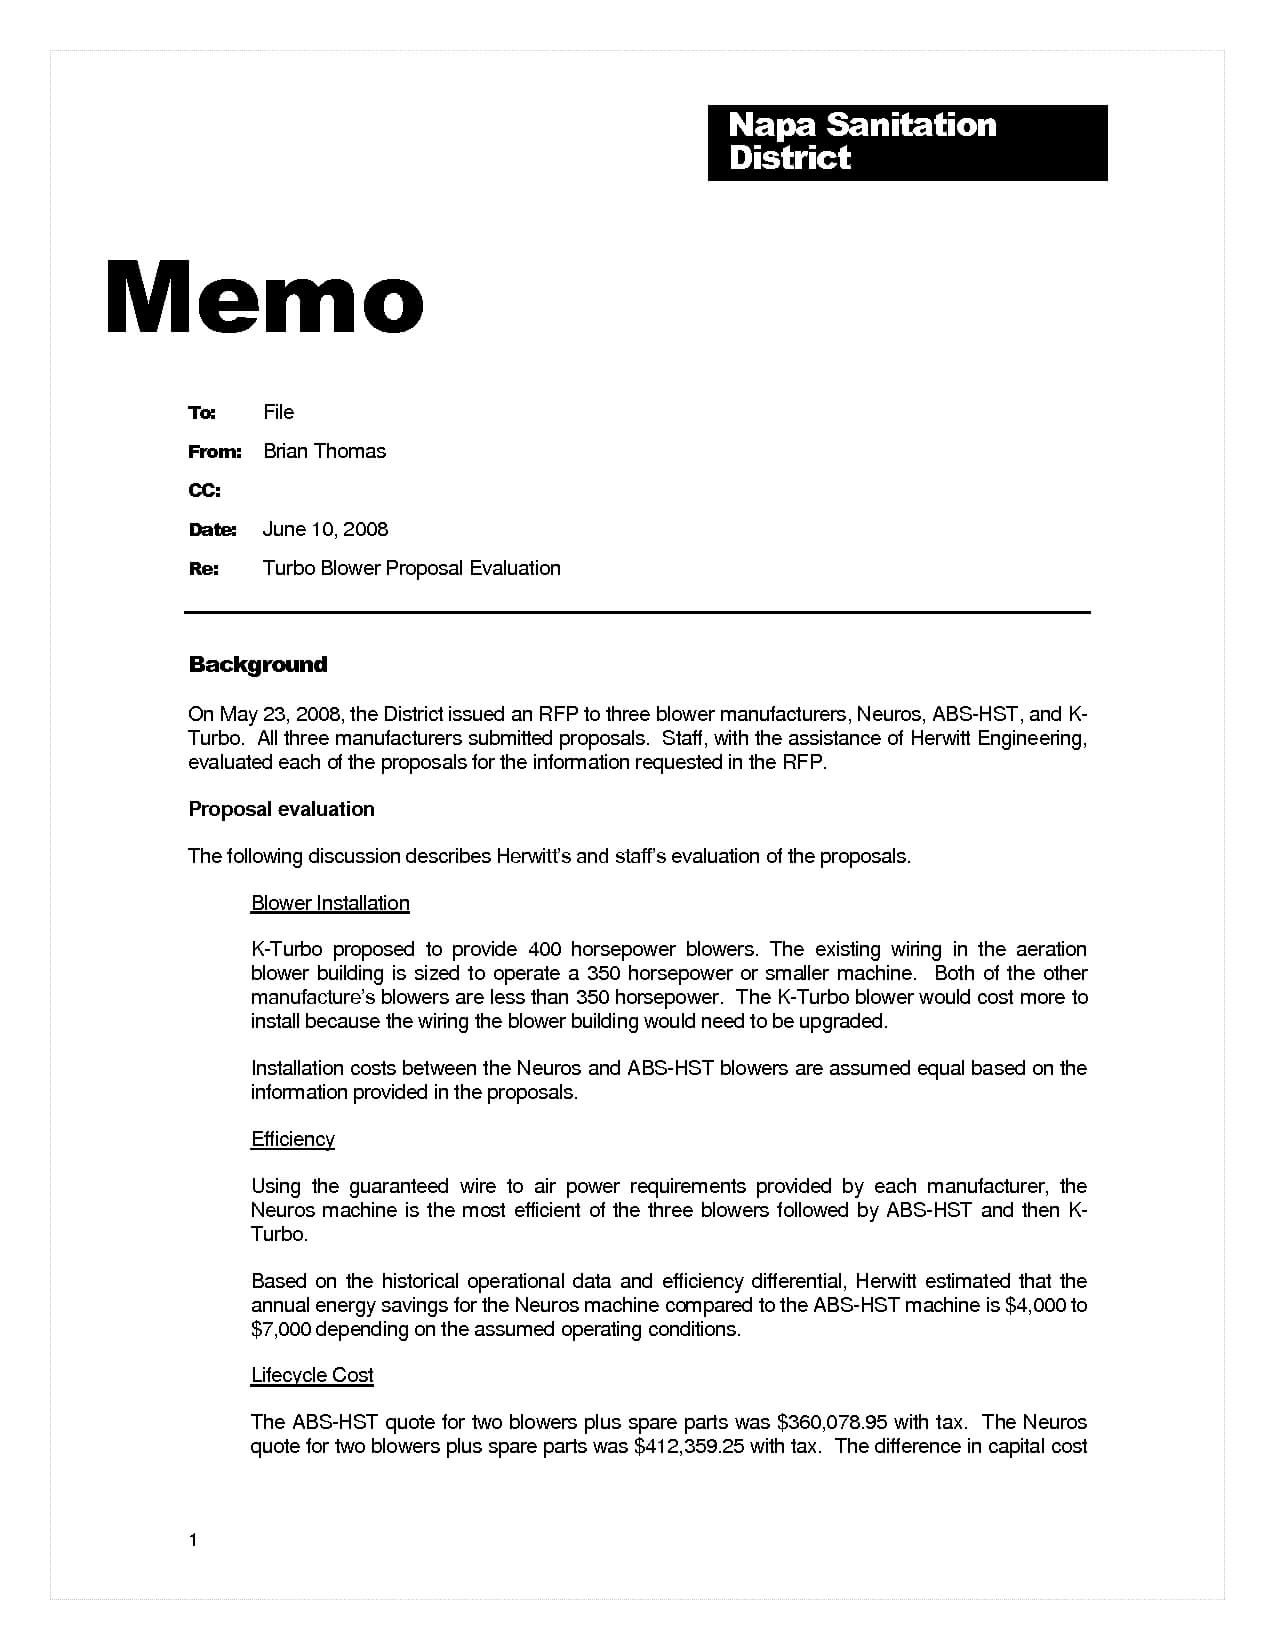 016 Memo Templates For Word Professional Business Template With Regard To Memo Template Word 2010